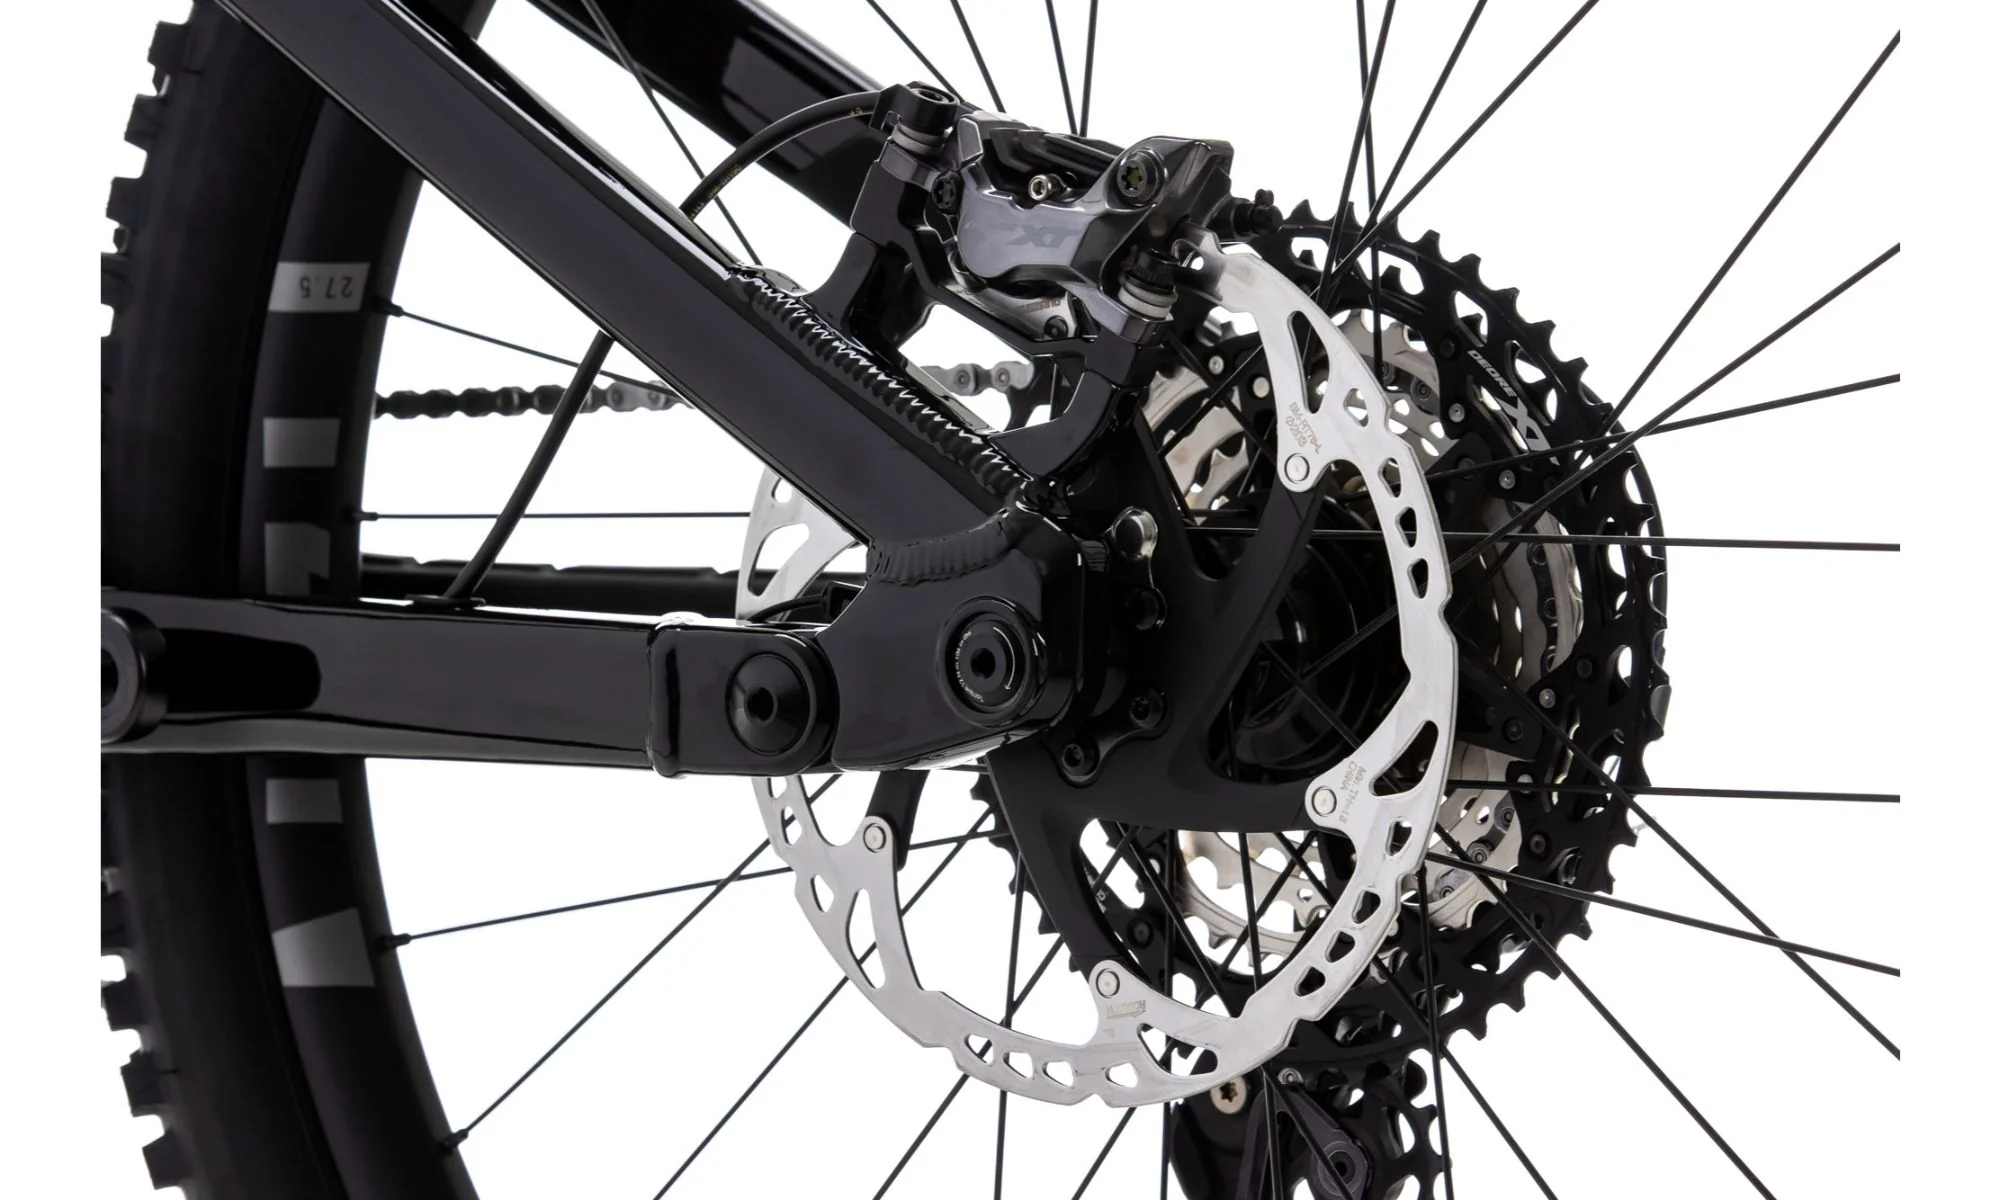 Vitus E-Sommet 297 VRX Mountain - Review - Off Road EMTB - Disk Brakes and Gears